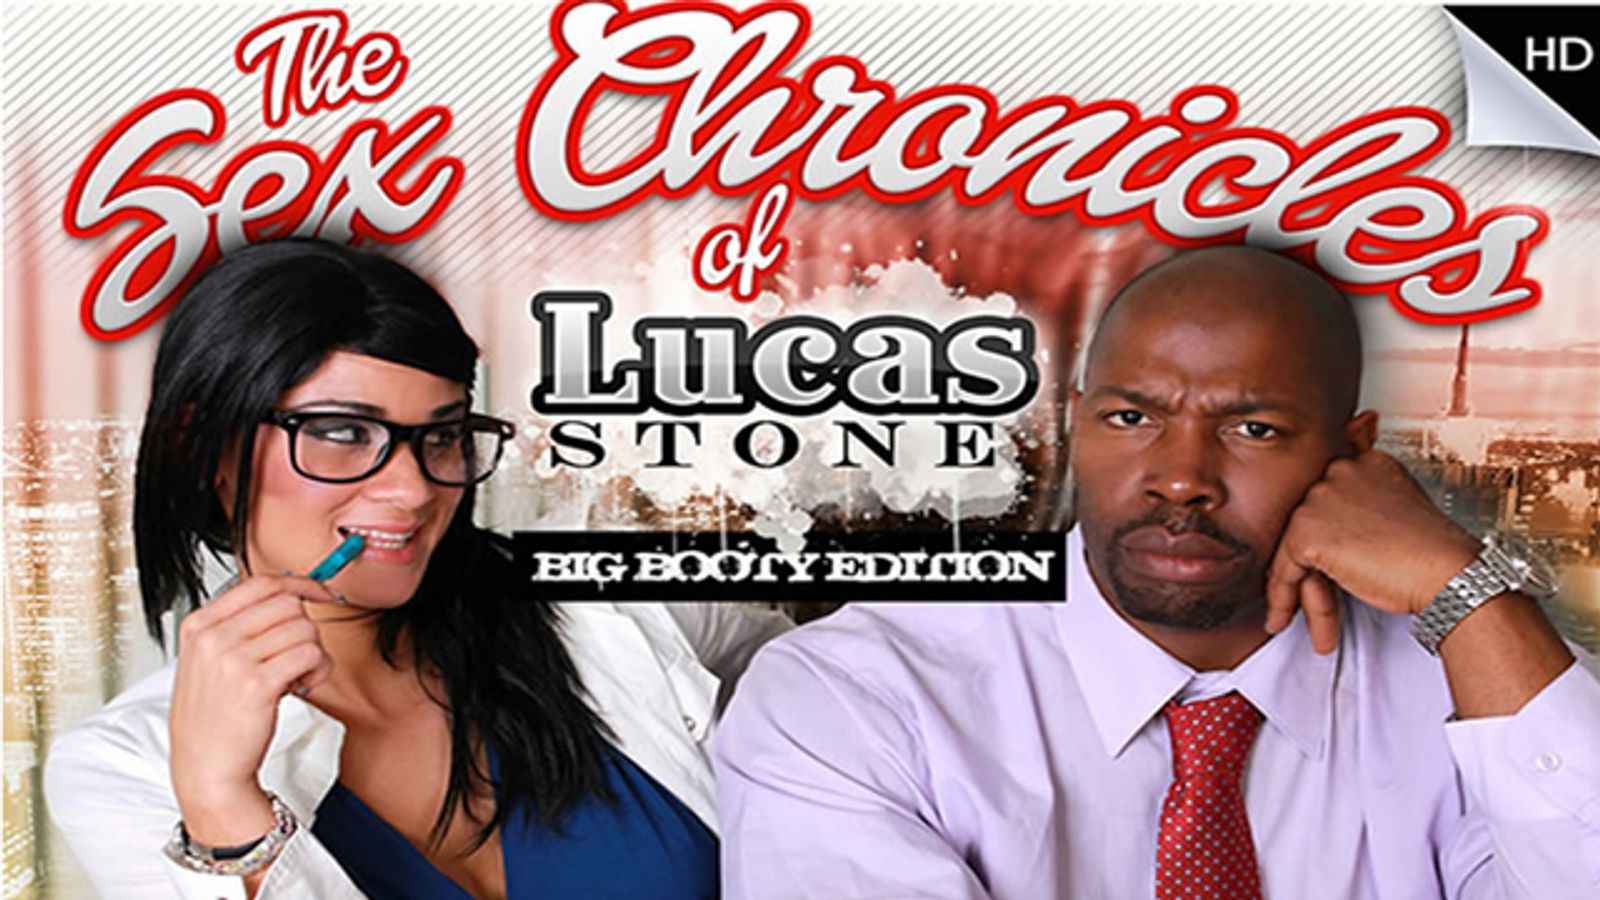 'Sex Chronicles of Lucas Stone' to be Revealed June 12